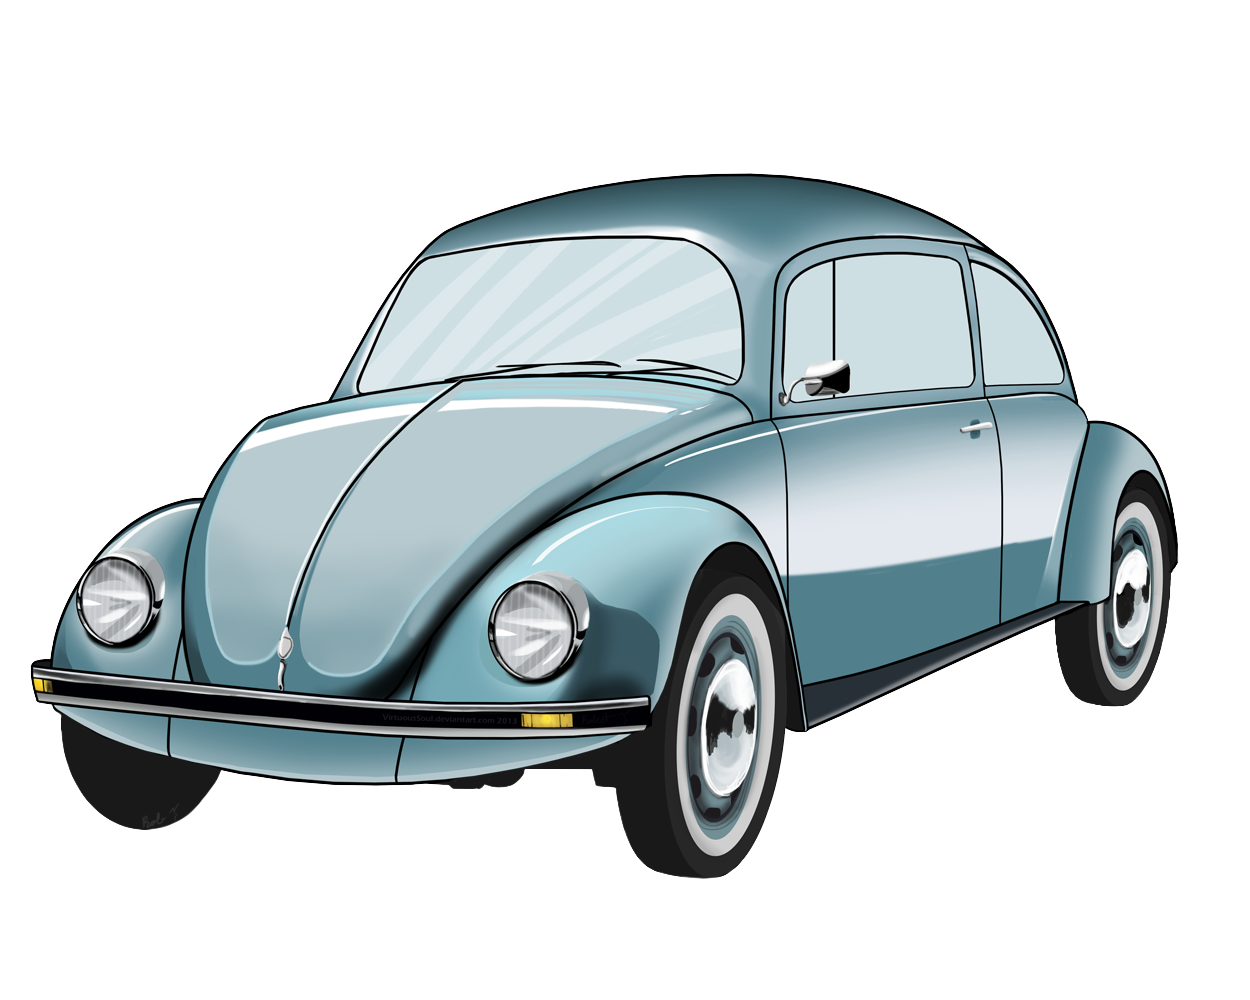 Classic Cars Clipart - Cliparts.co